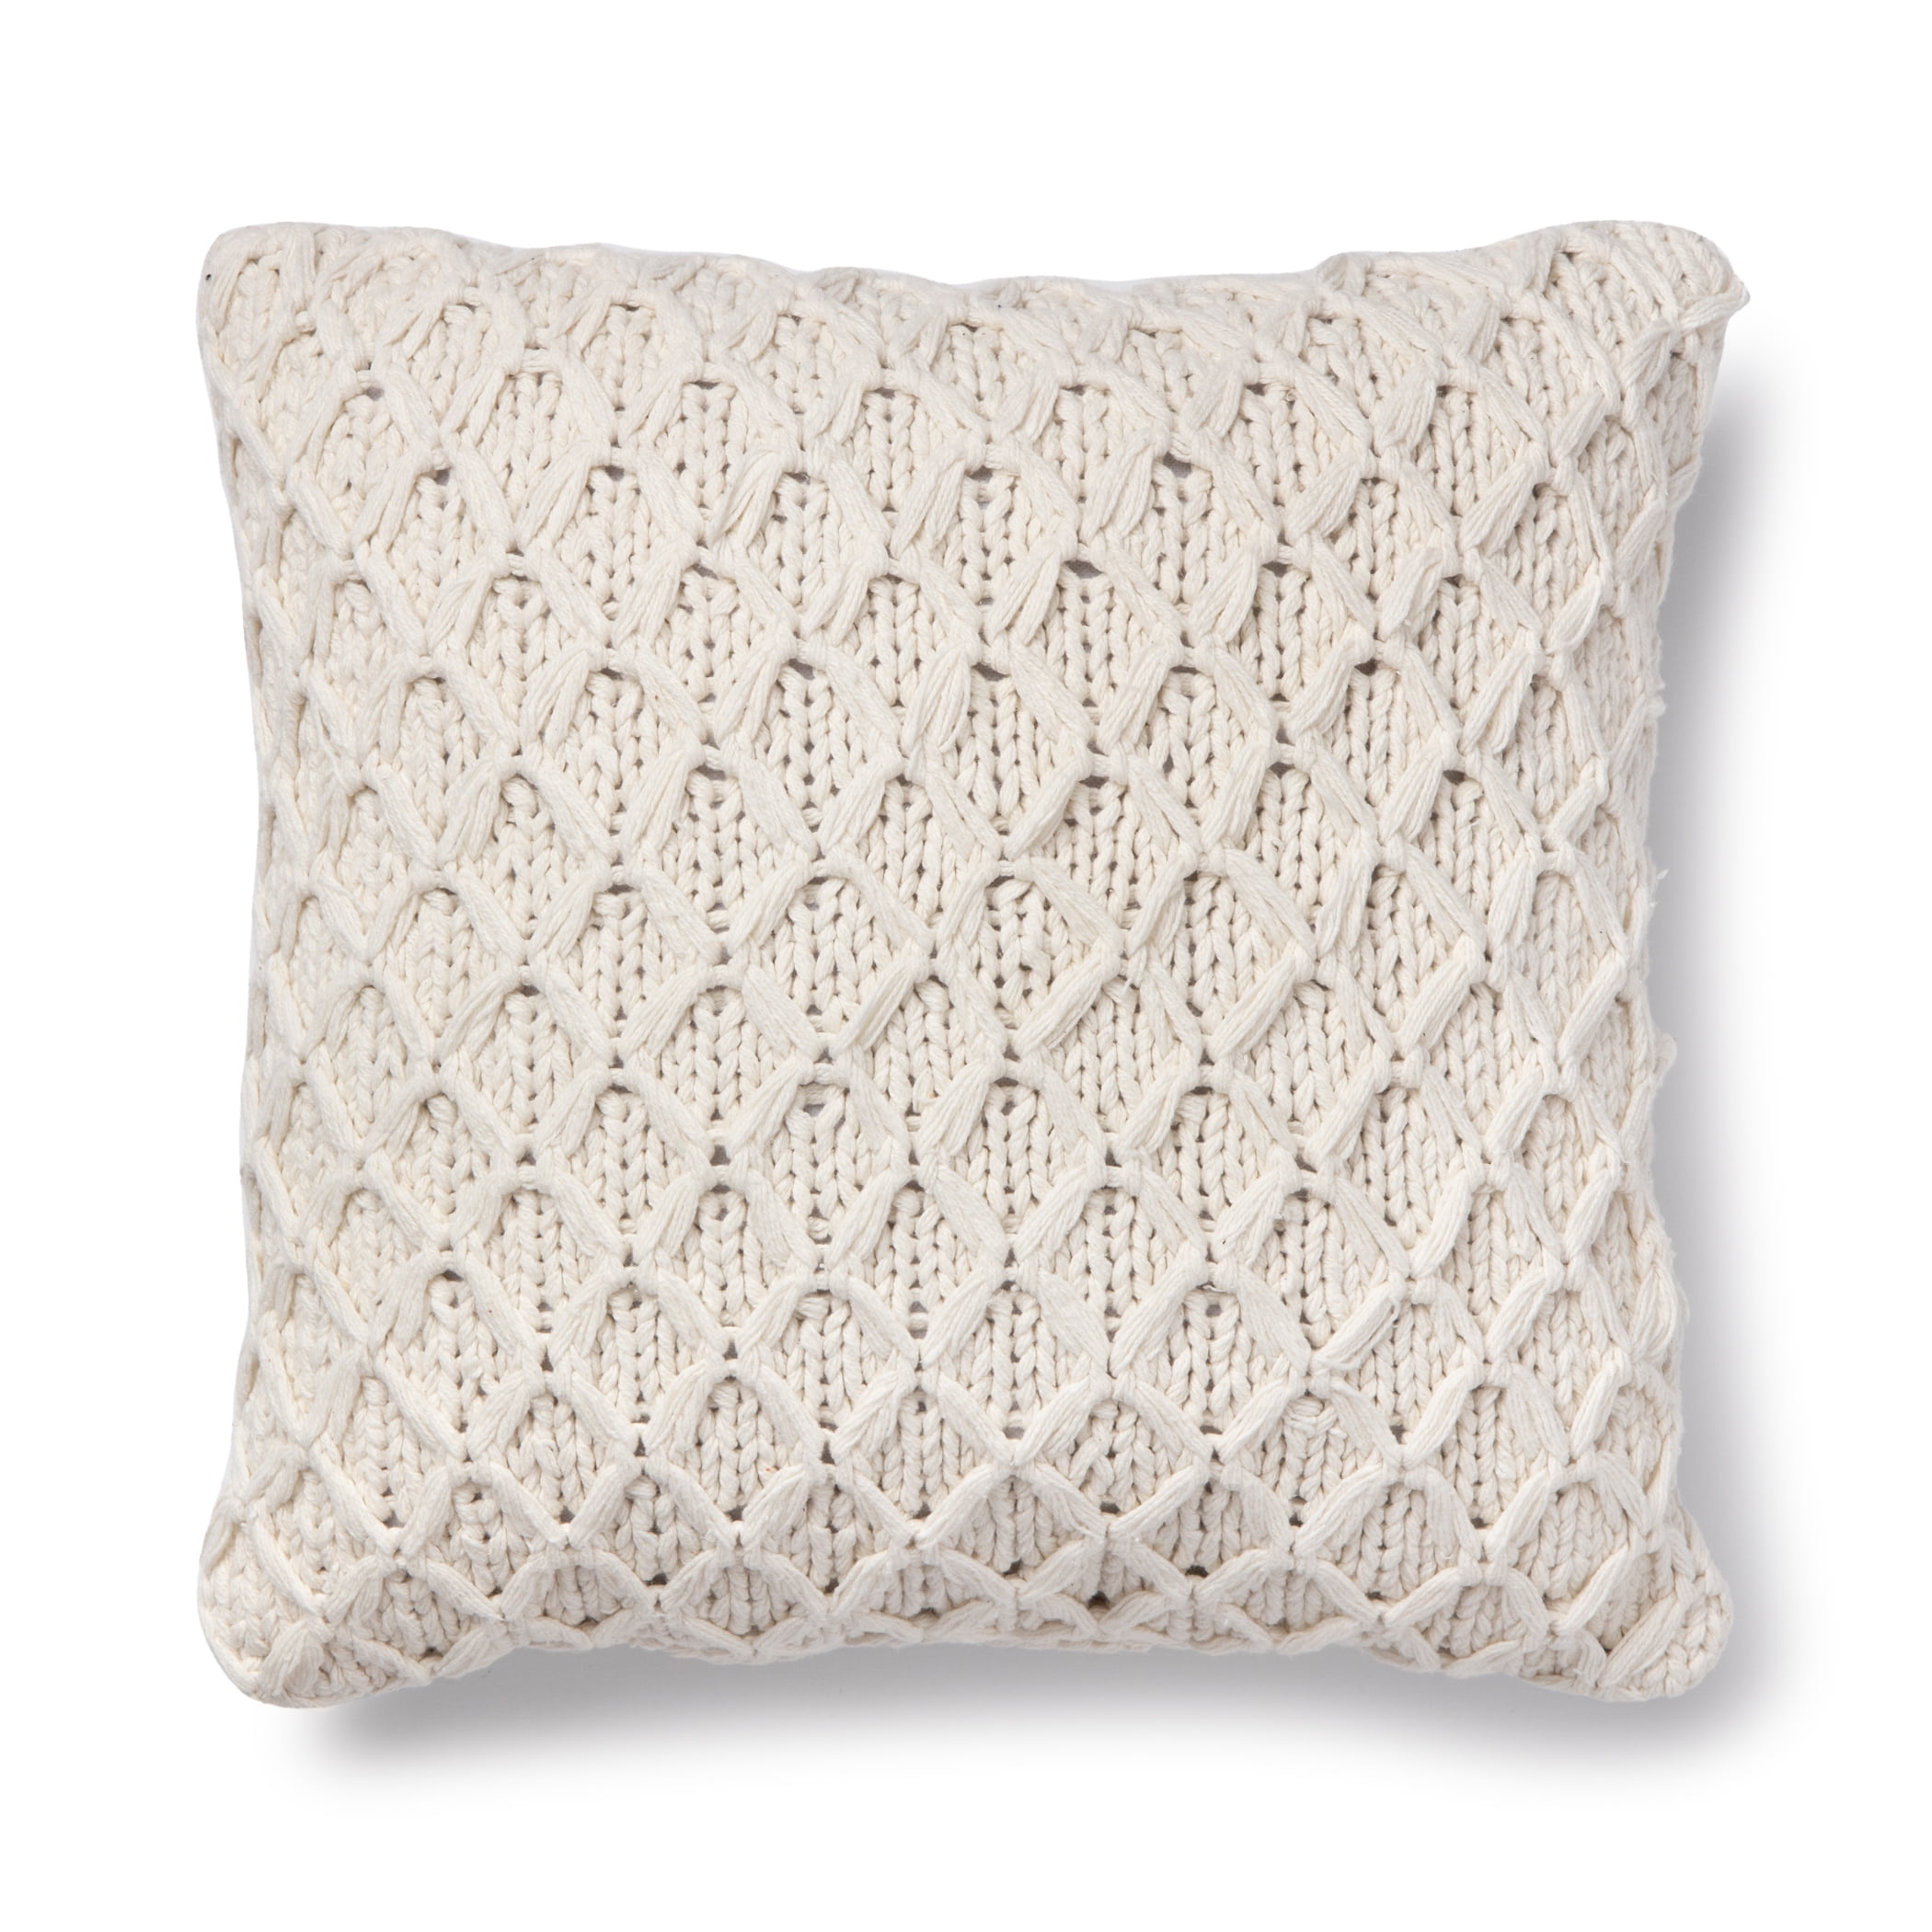 Better Homes & Gardens Sweater Knit Decorative Square Throw Pillow, 18" x 18", Ivory, Single Pillow